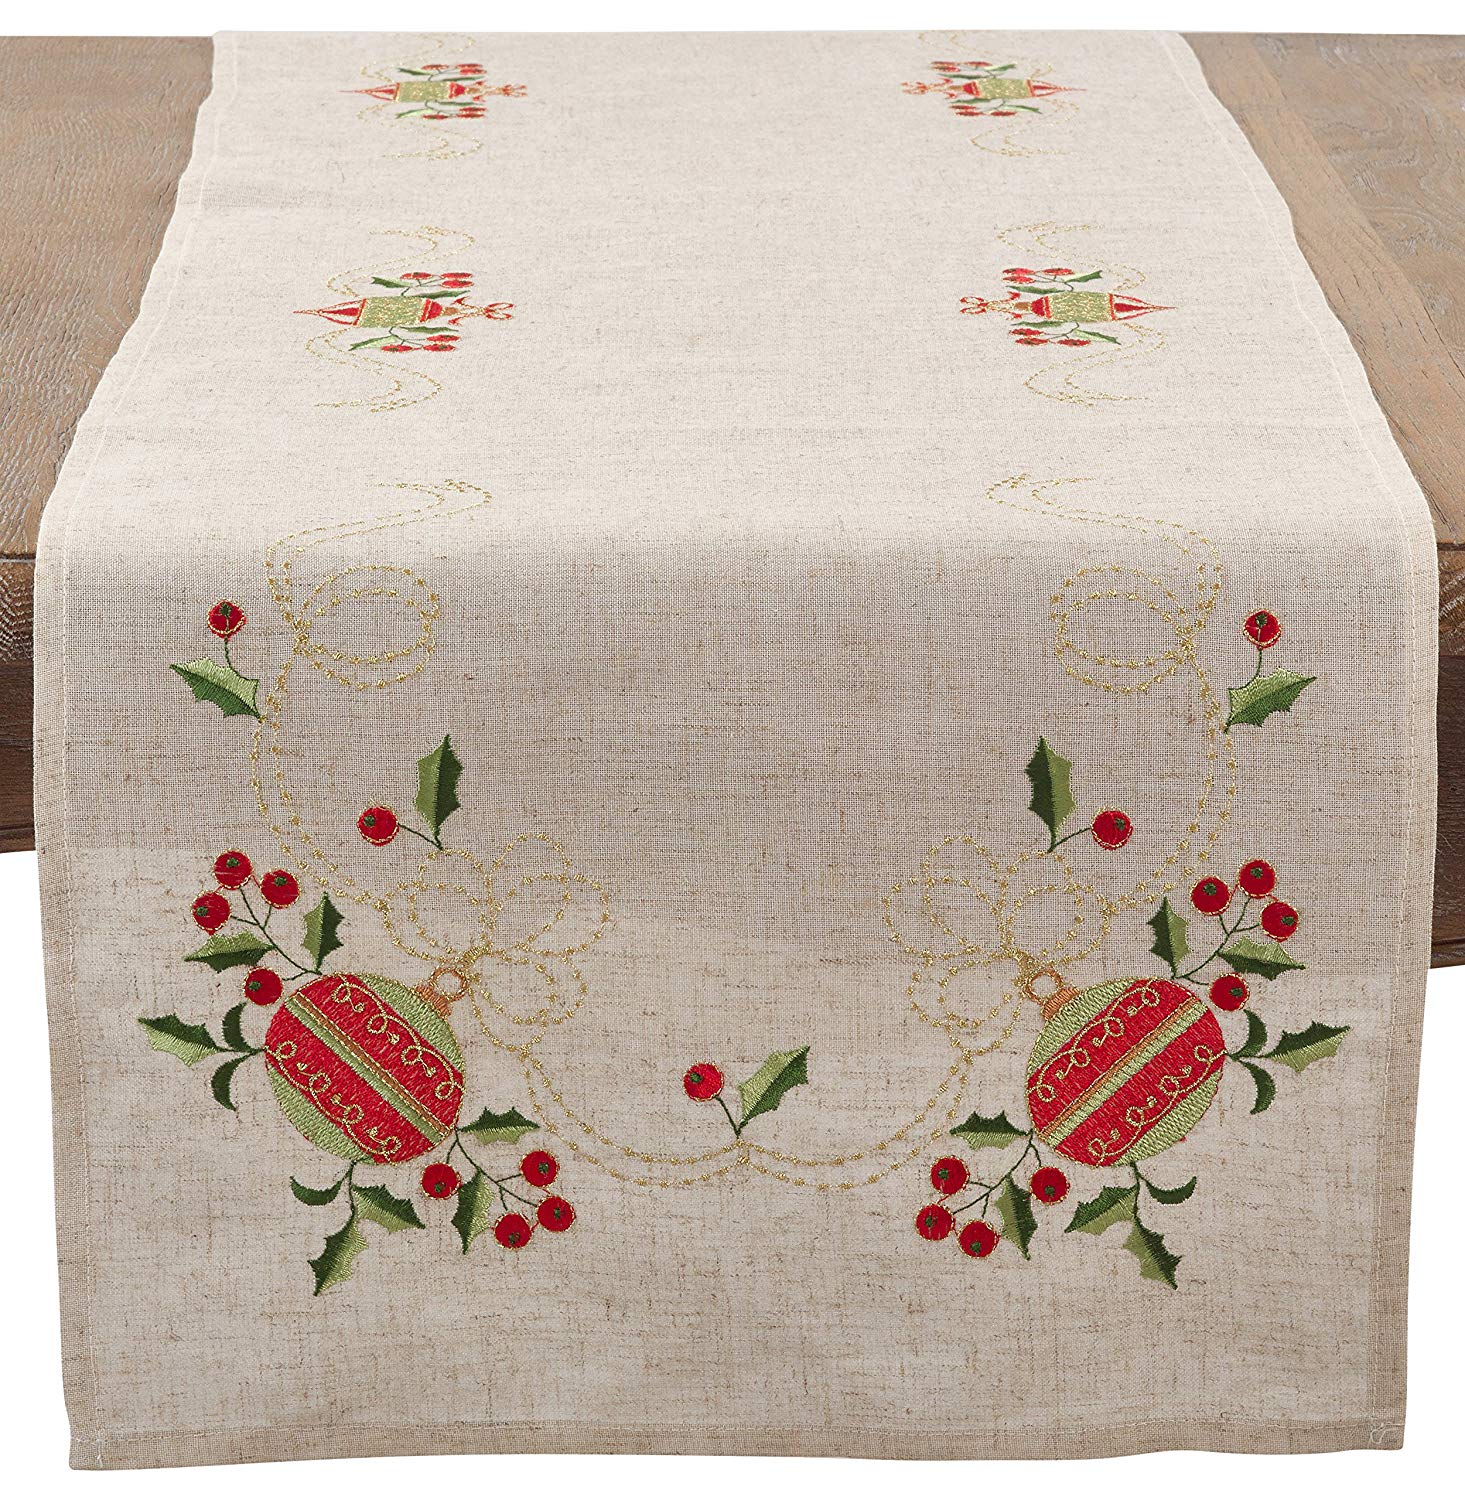 saro lifestyle embroidered ornament design christmas accent your focus table runner pattern linen blend natural home kitchen hampton bay furniture grey chairs wall real wood grill